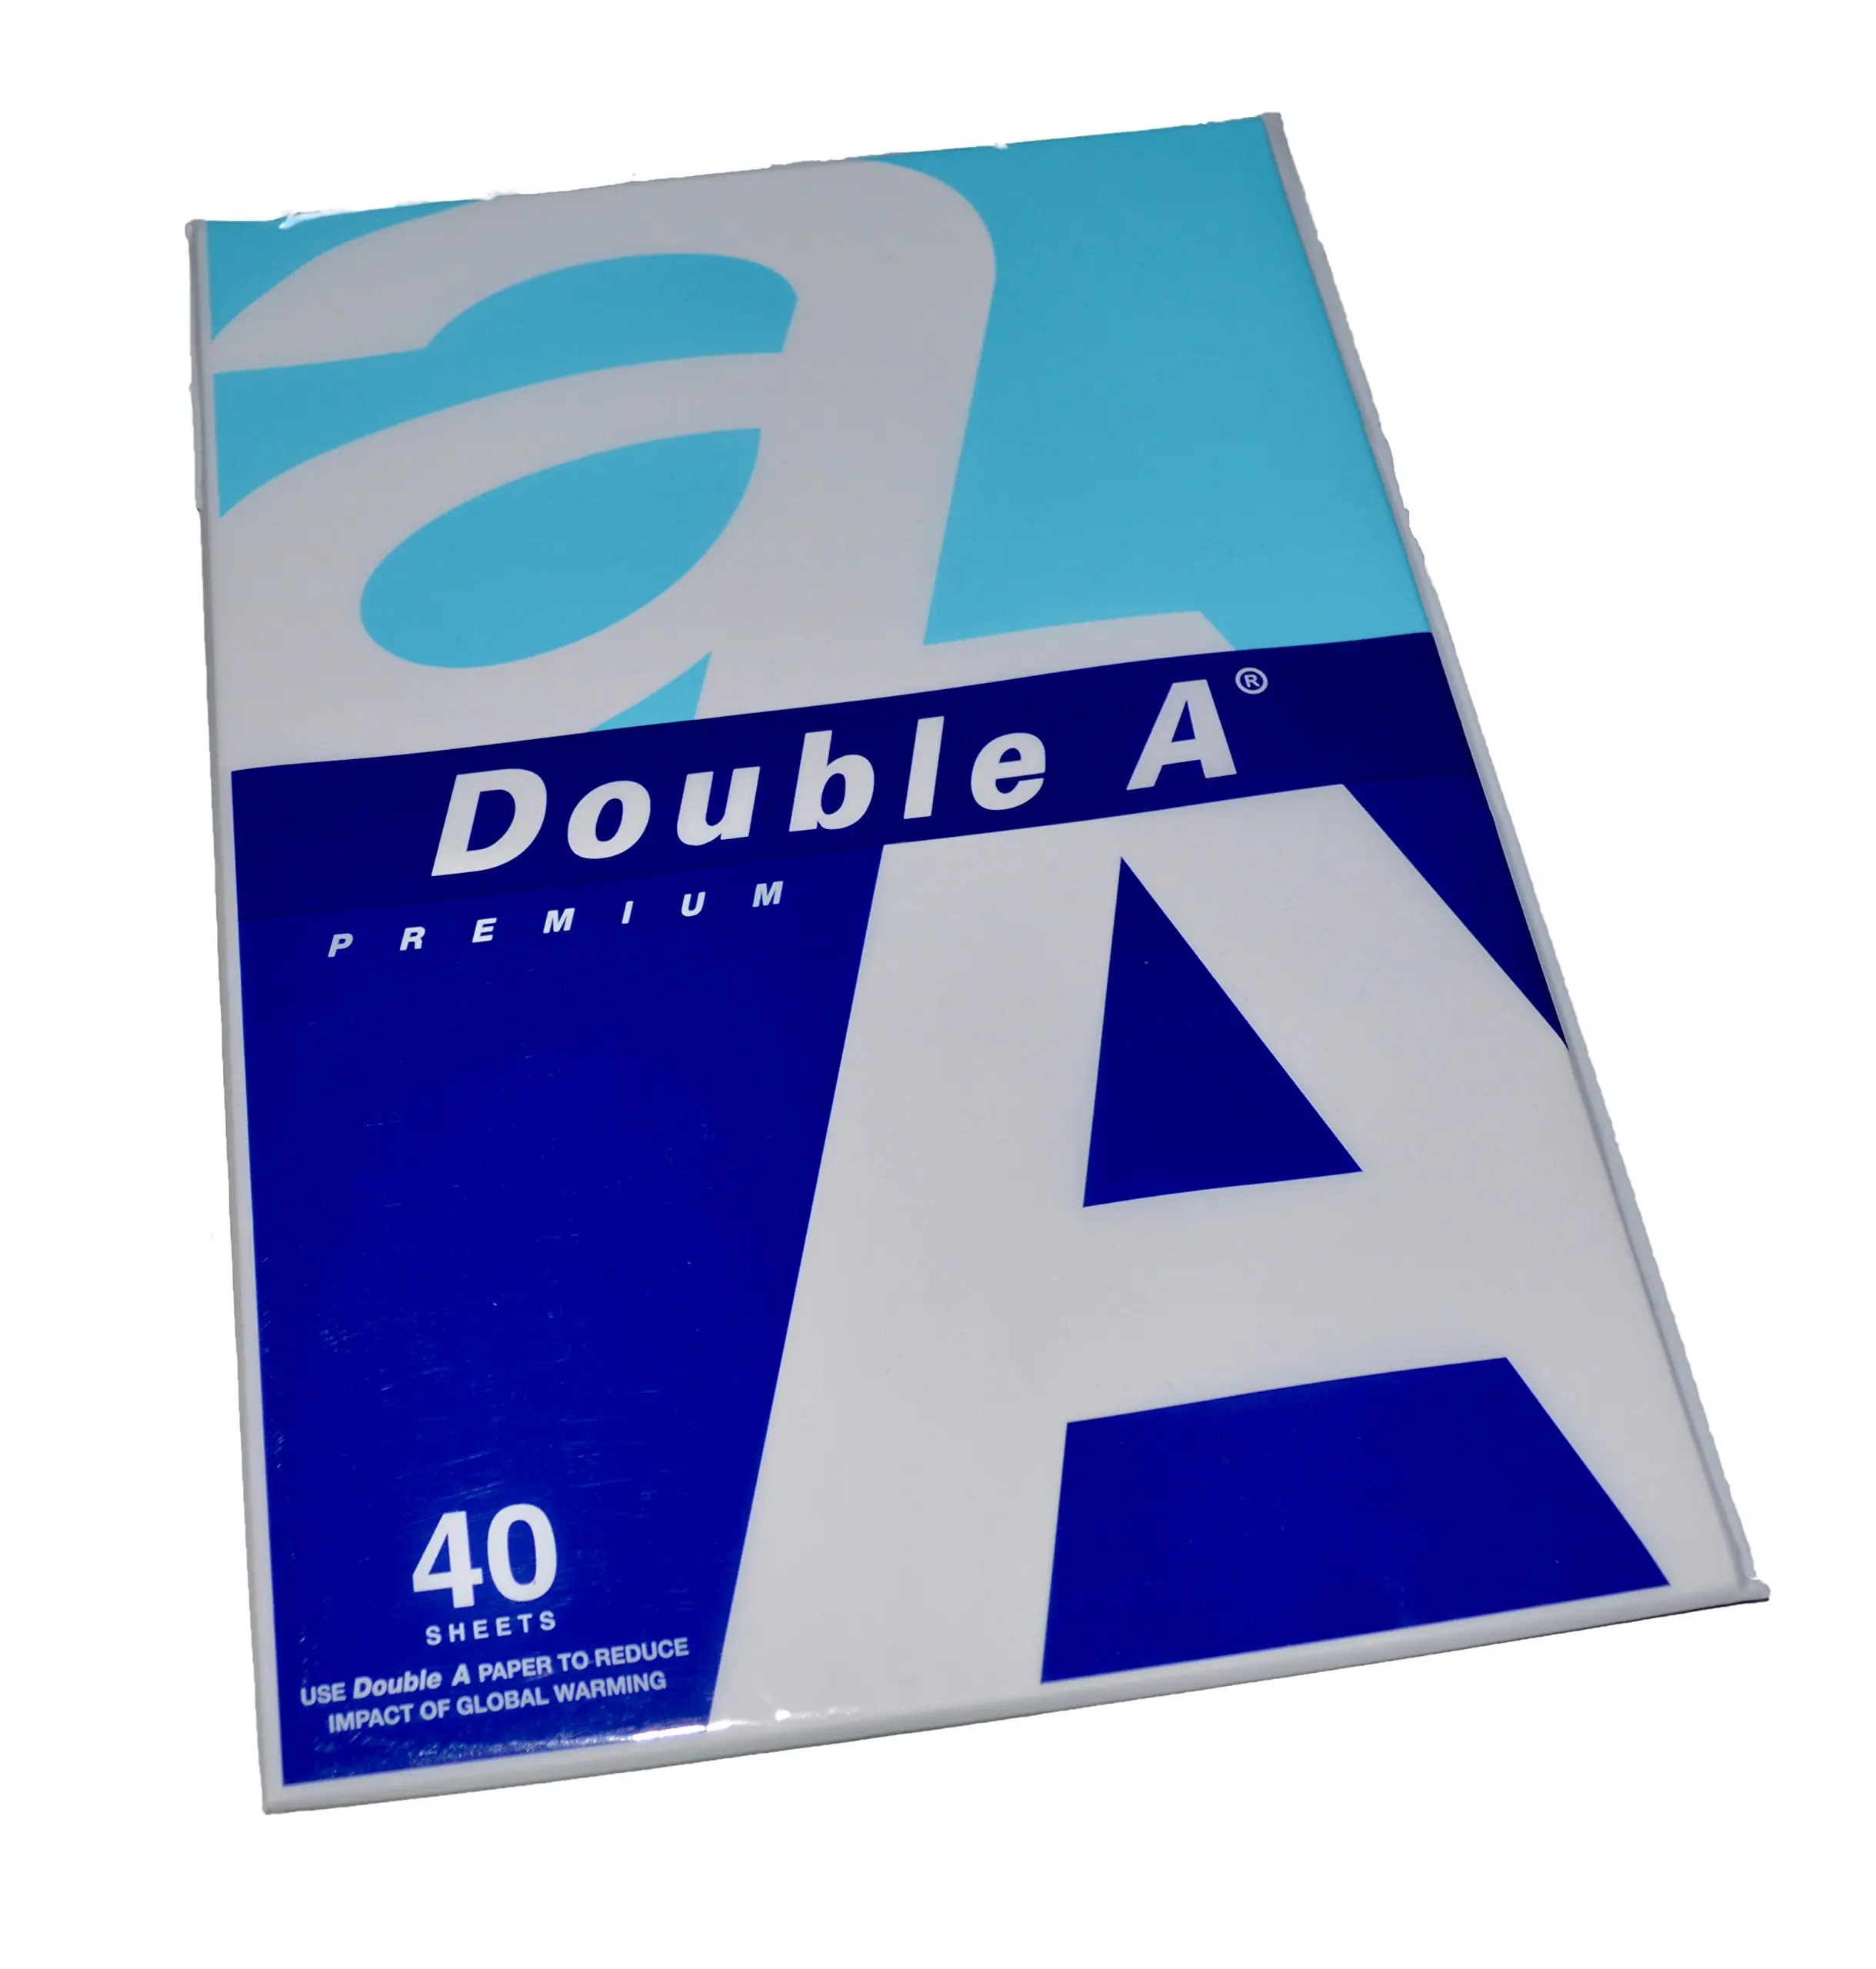 A4 Premium Printer Paper Imported from Thailand 40 Sheets Available in Packs of 40,100 or 500 Sheets